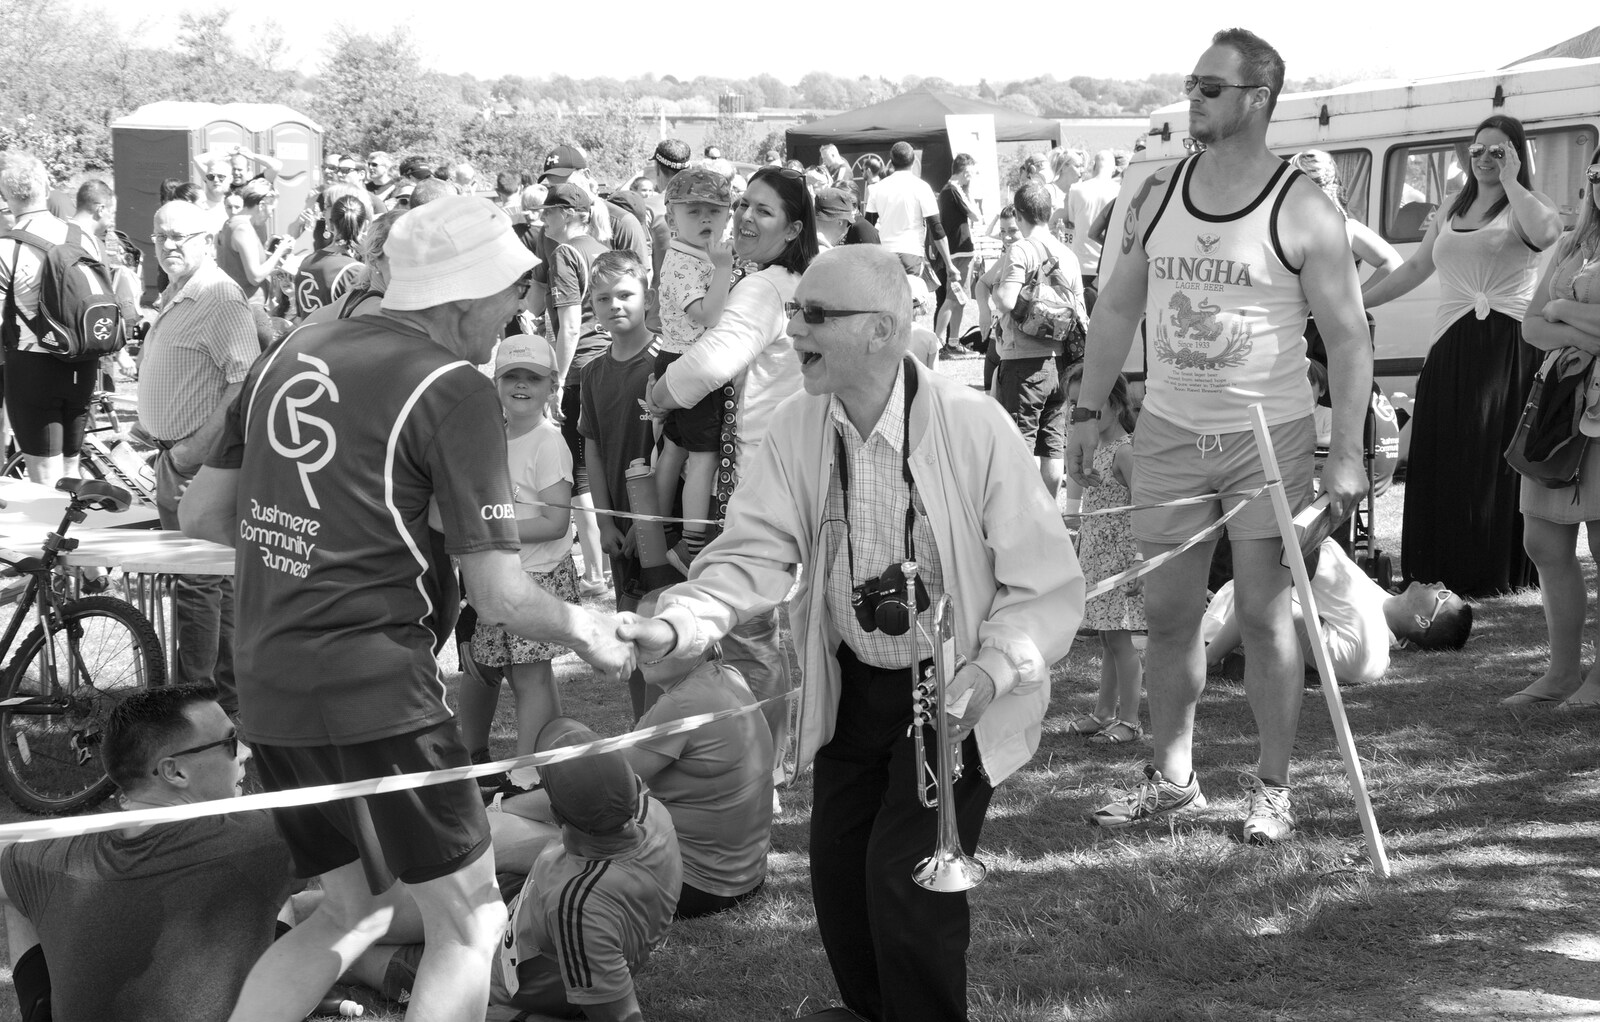 The trumpeter shakes hands from Isobel's 10km Run, Alton Water, Stutton, Suffolk - 6th May 2018